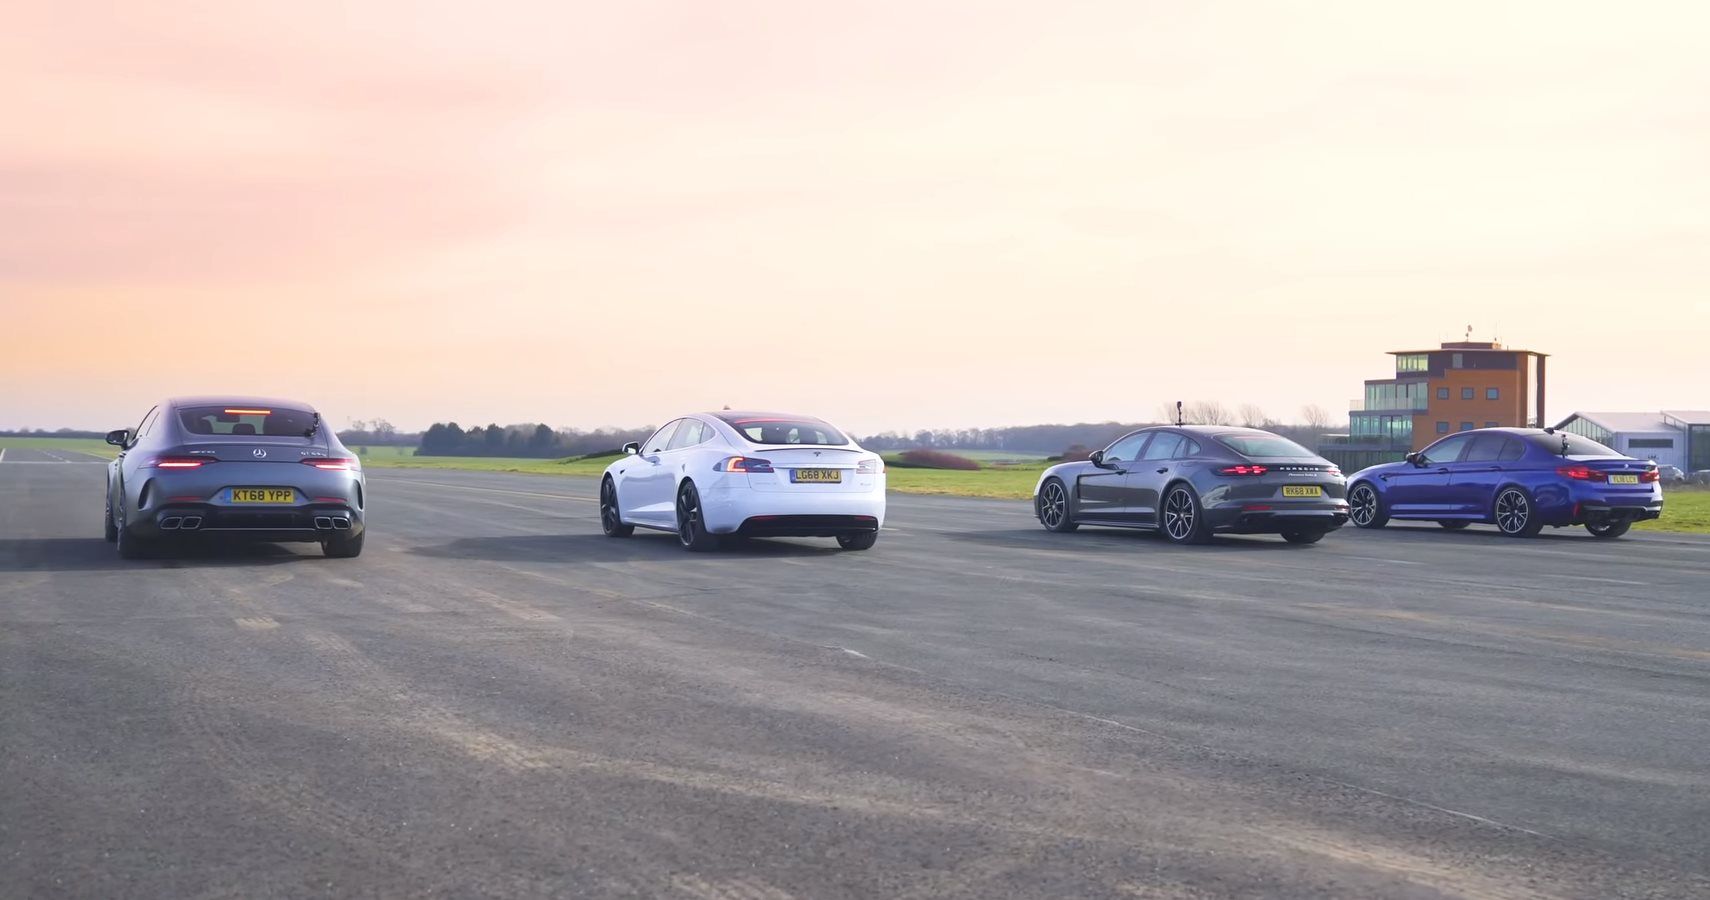 Tesla Model S, AMG GT 63 S, BMW M5, & Posche Panamera Turbo S Compete In Drag Race Action